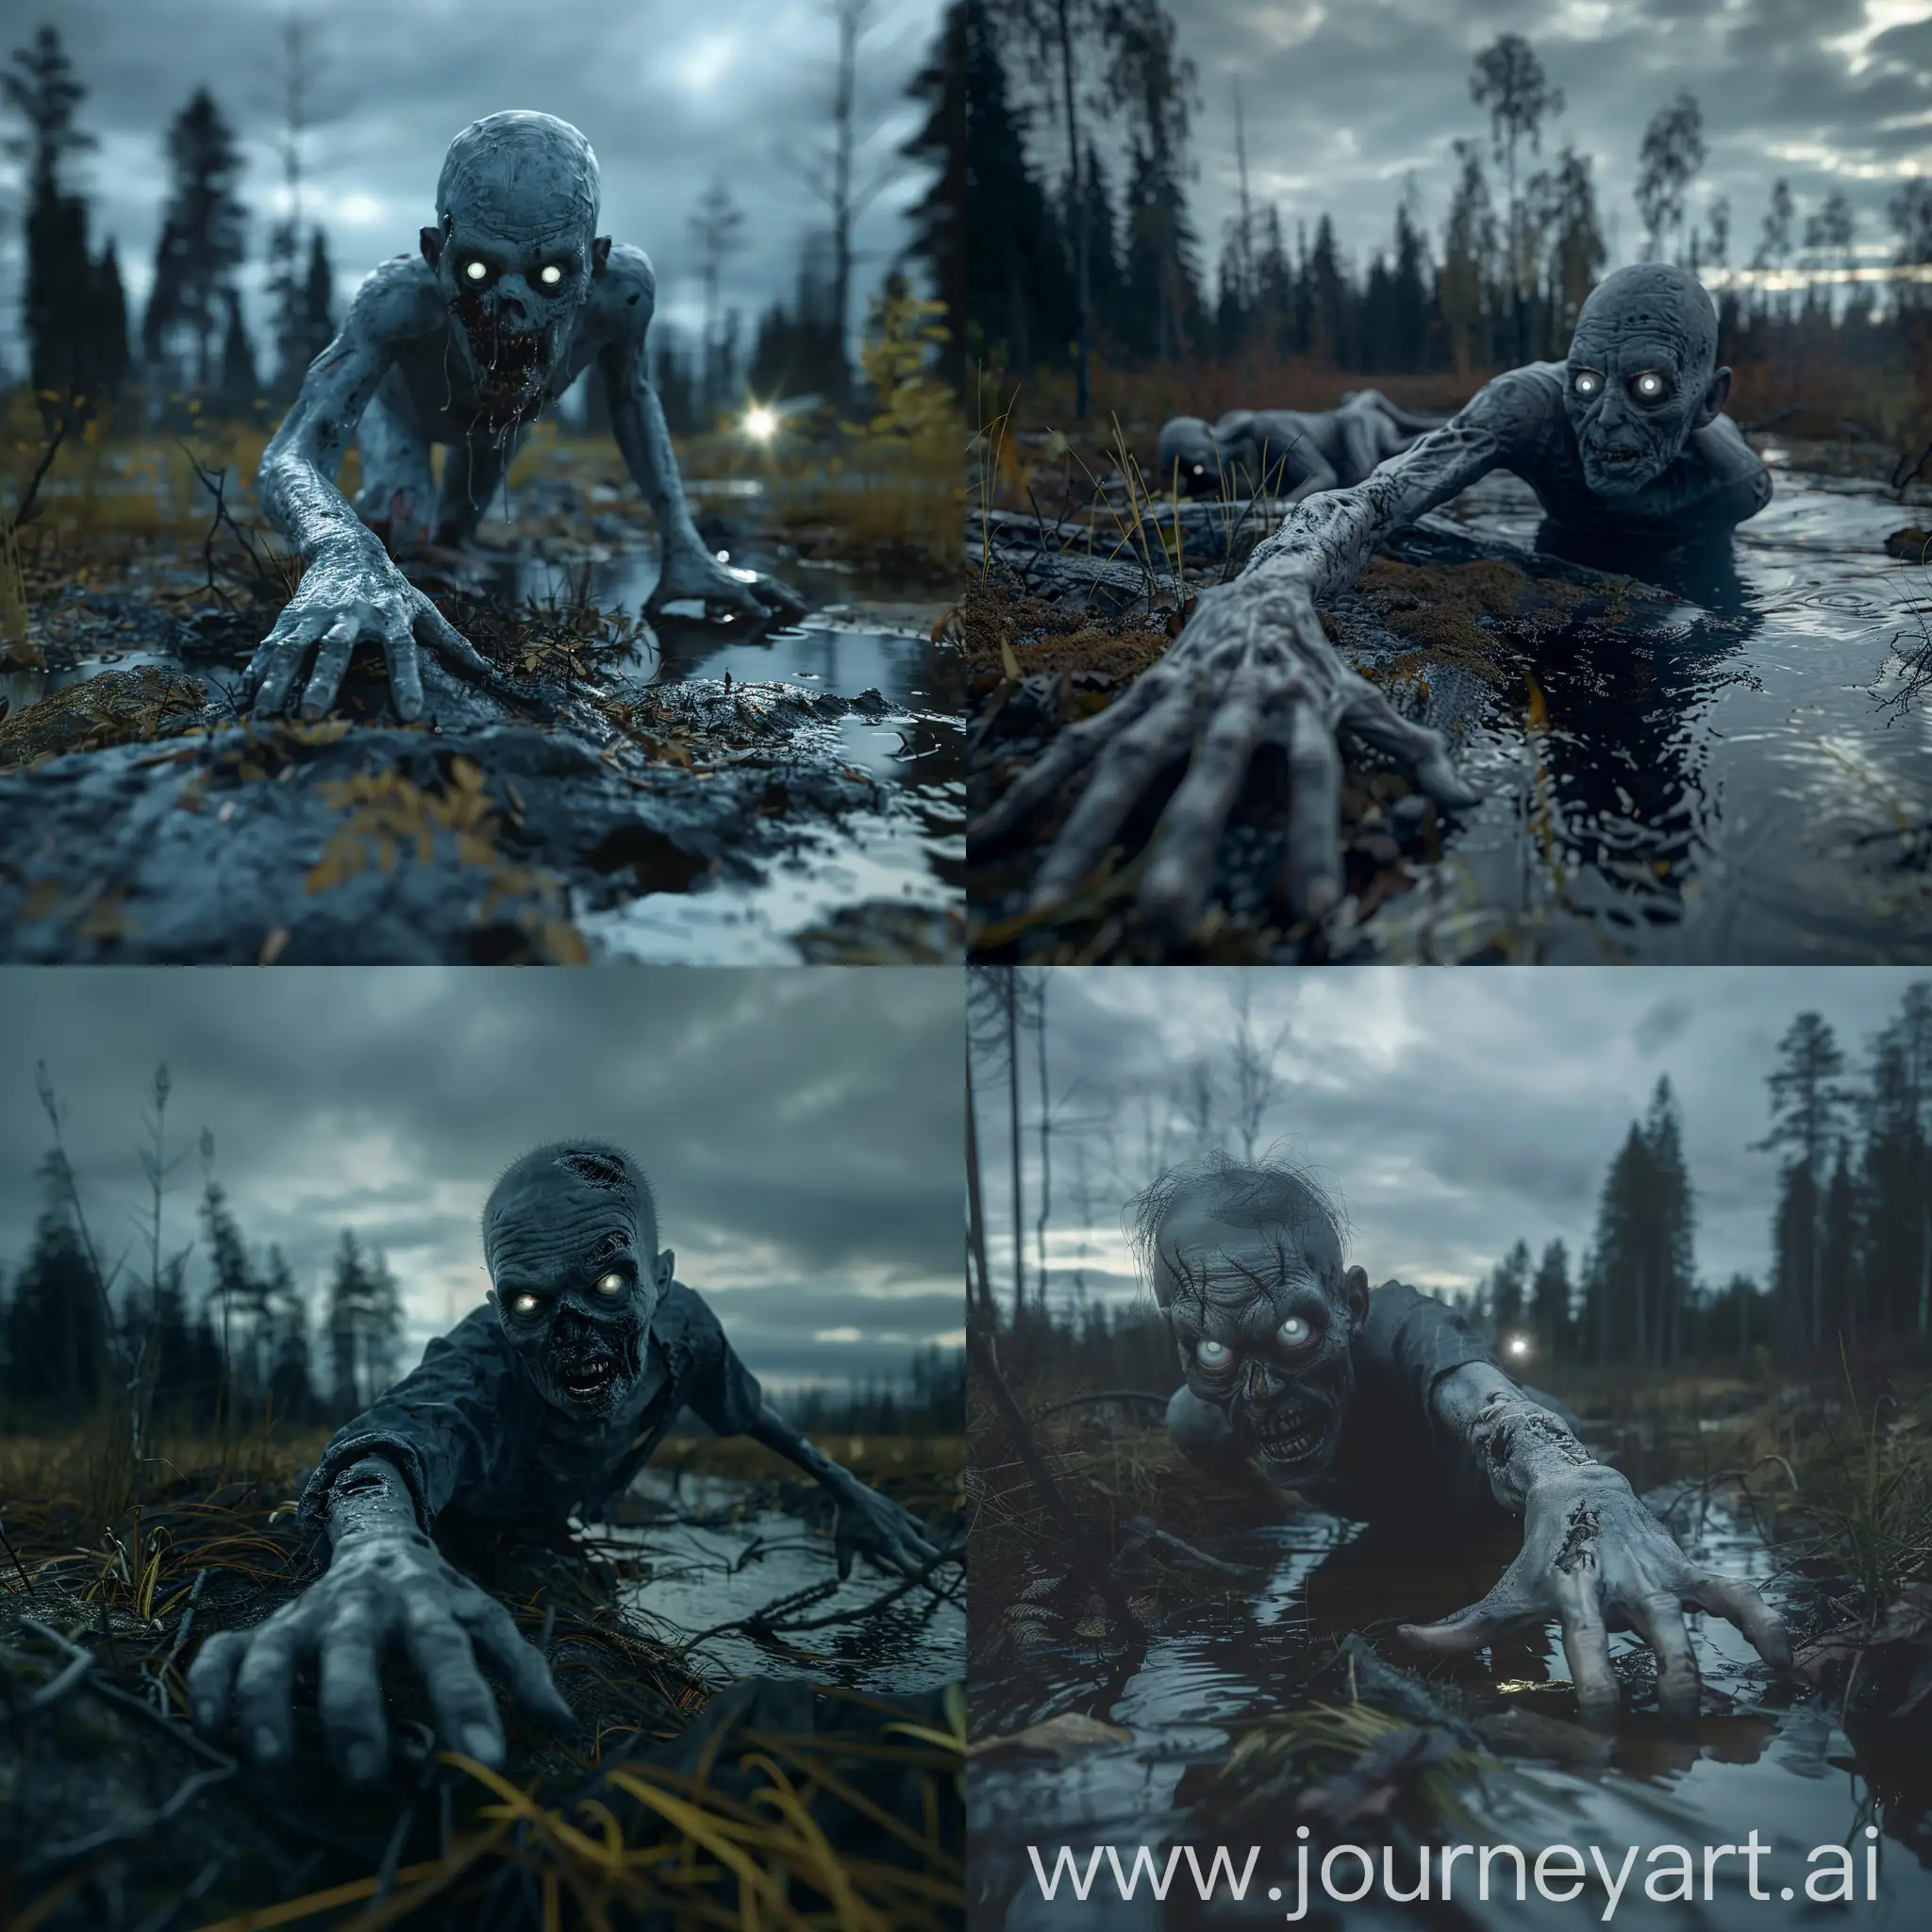 Eerie-Night-Encounter-Zombies-in-Autumn-Taiga-Forest